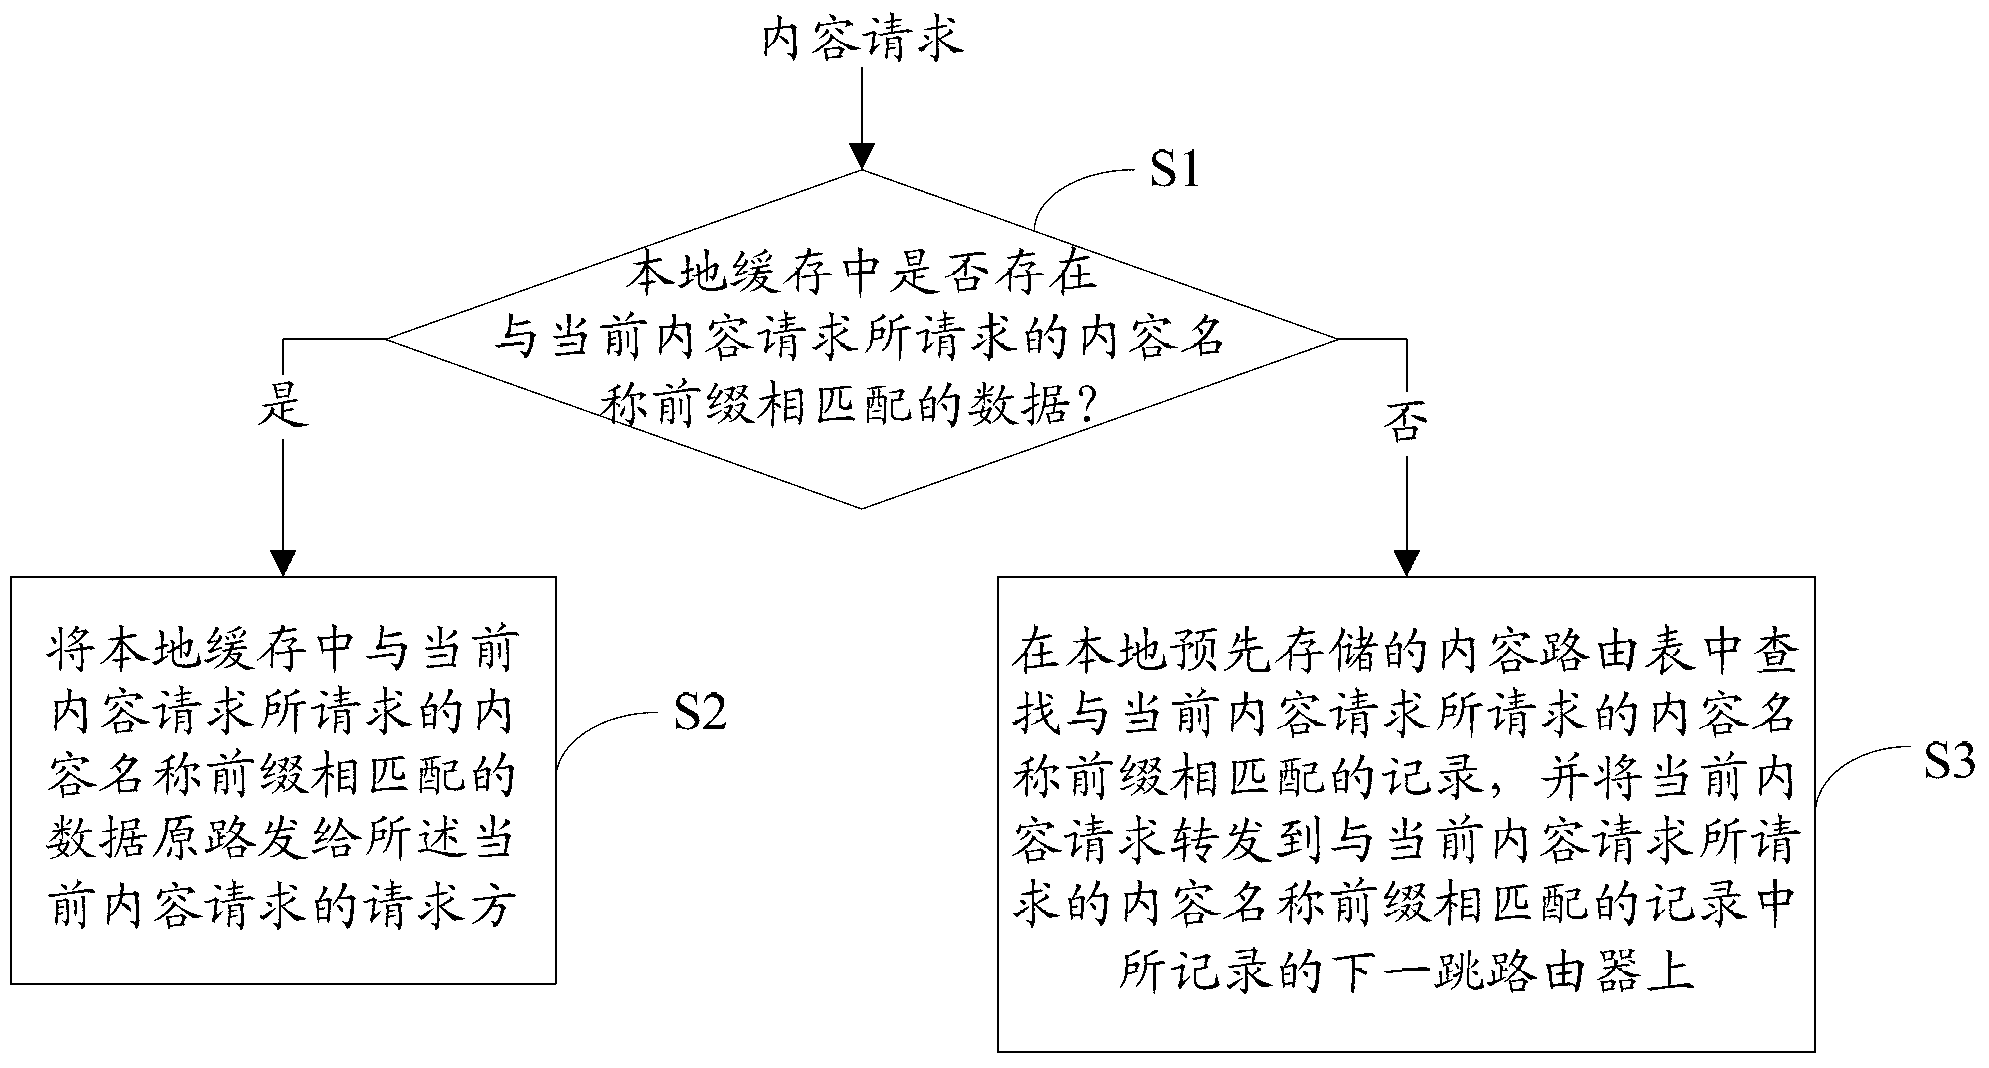 Route forwarding method for content internet